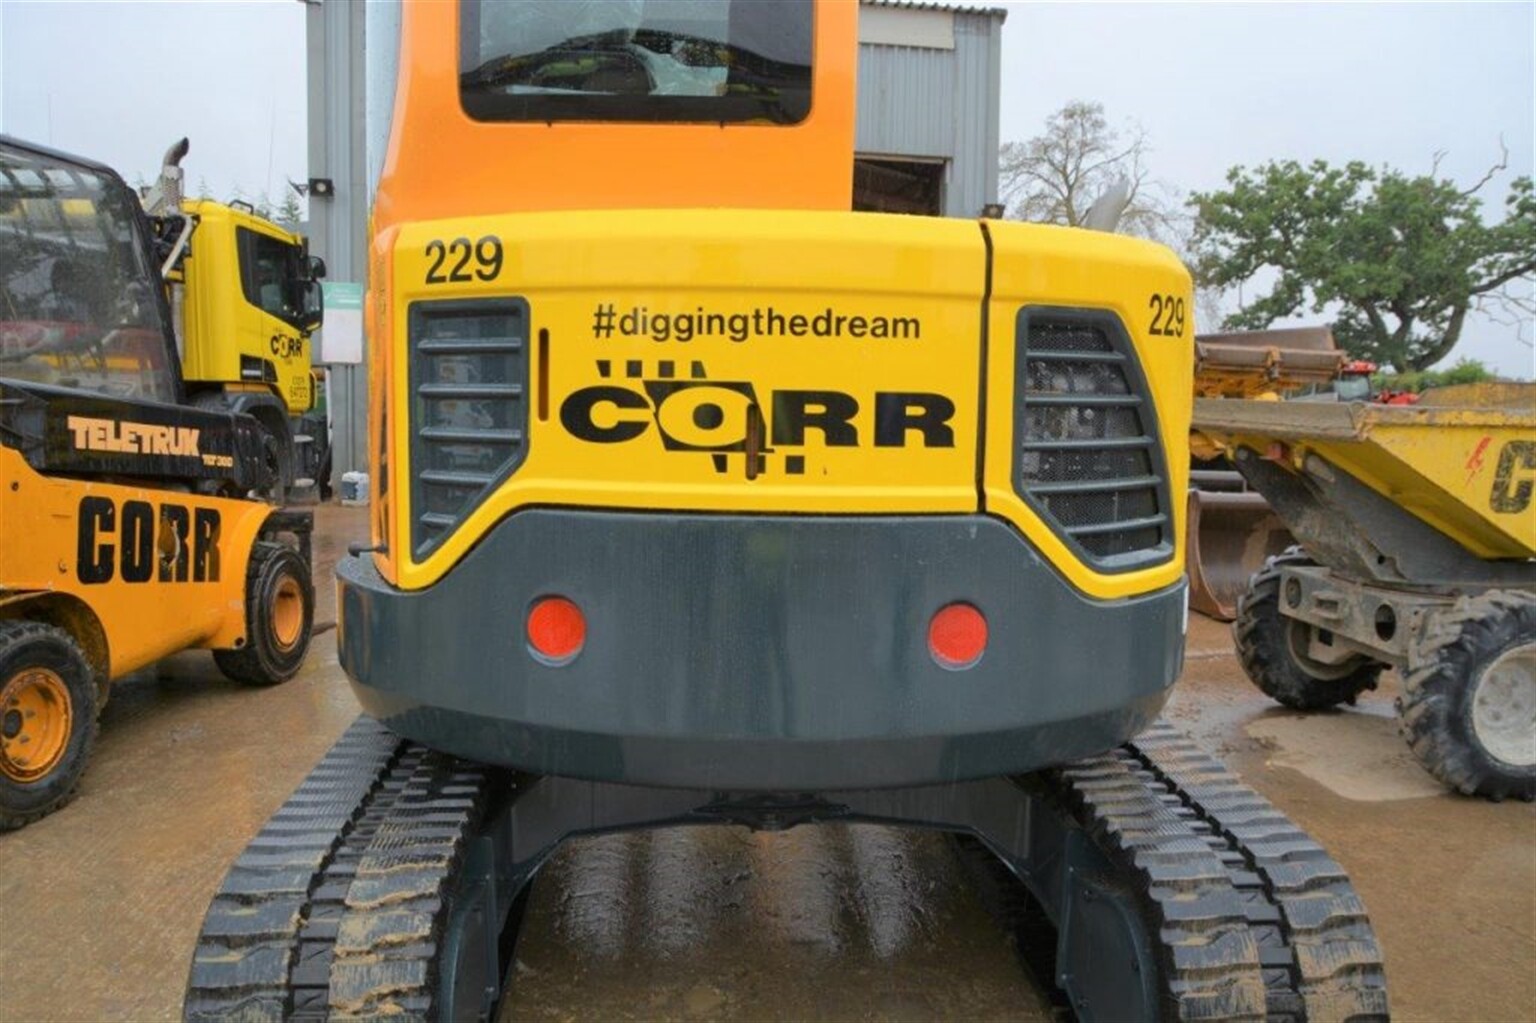 #Diggingthedream with E. Corr Plant Hire